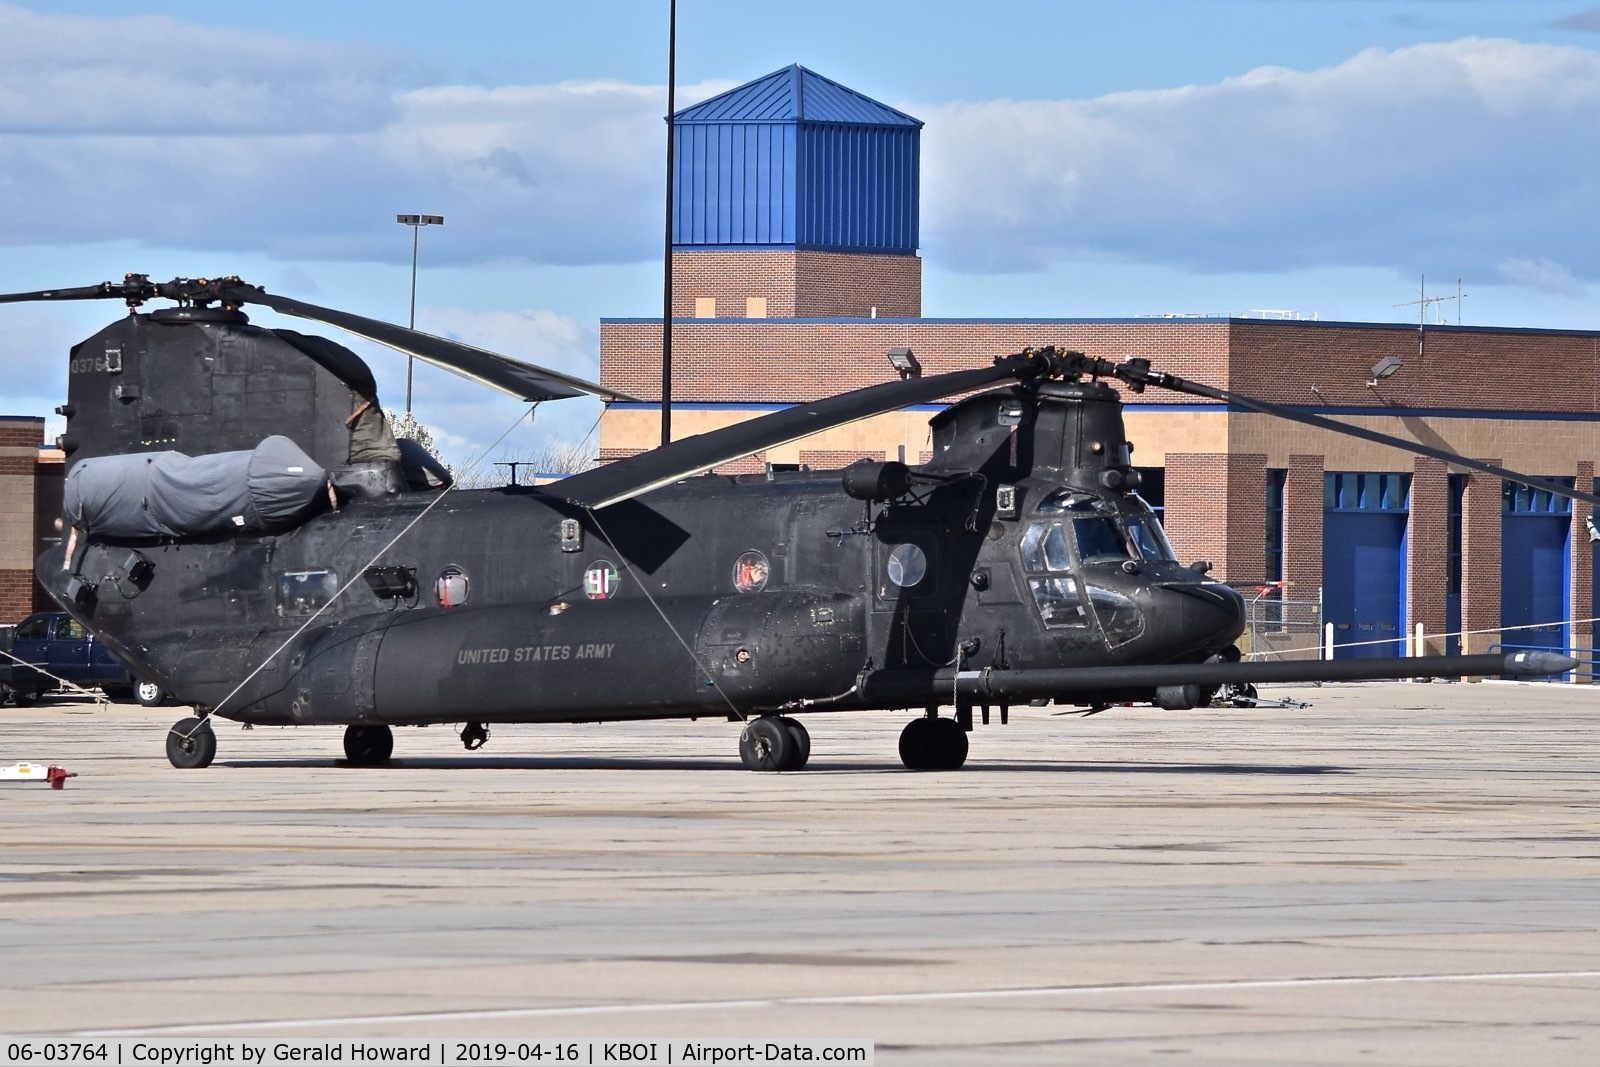 06-03764, Boeing MH-47G Chinook C/N M.3764, U.S. Army 160th Special Operations Aviation Regiment (SOAR) “Night Stalkers” 4th BN, Joint Base Lewis-McChord, WA.